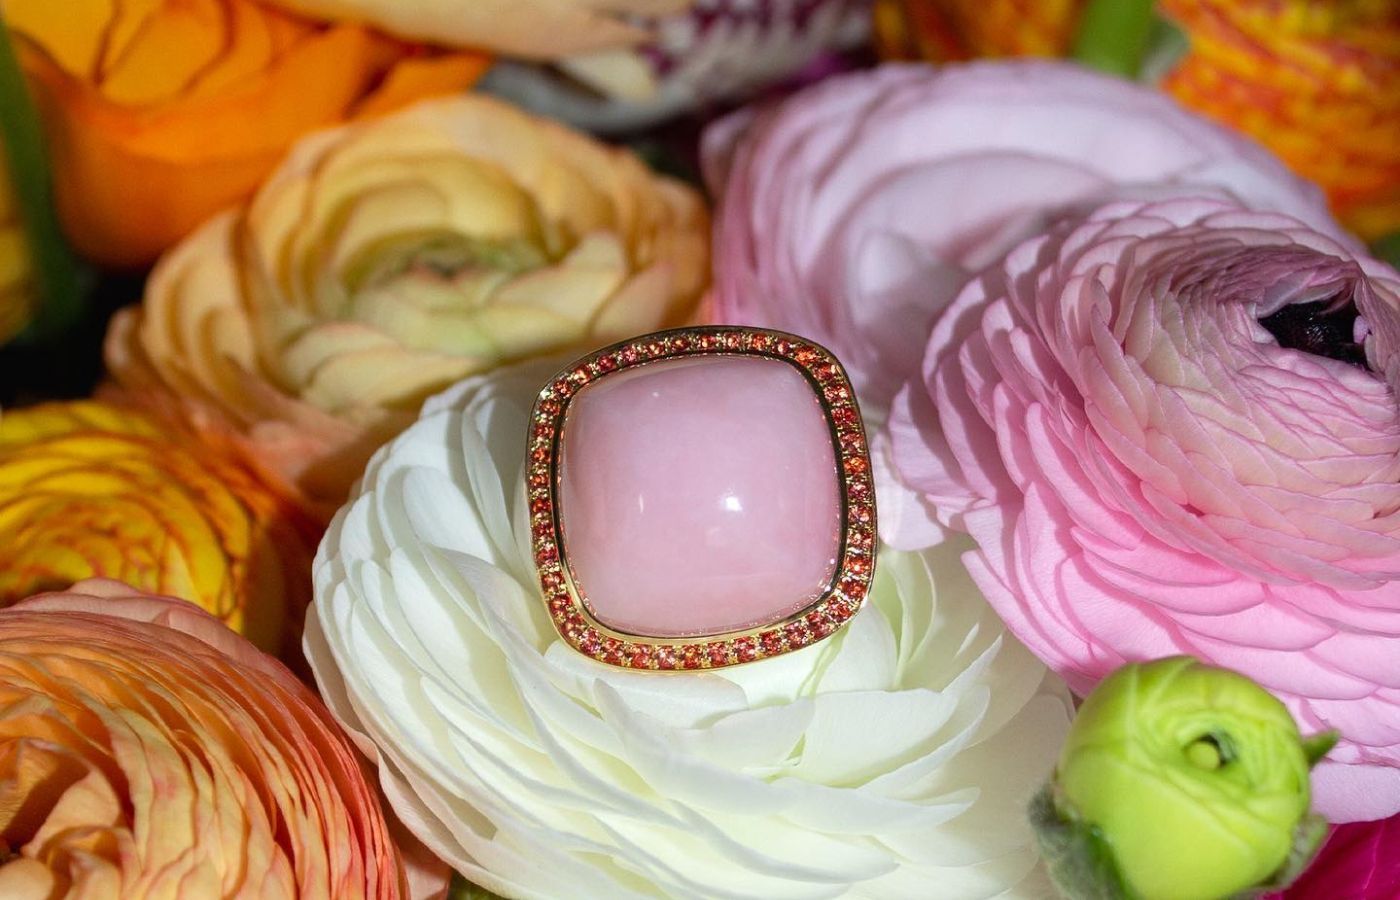 Charlotte Reedtz Jewellery Magic Wish ring in 18k yellow gold with a pink opal cabochon and orange sapphire halo